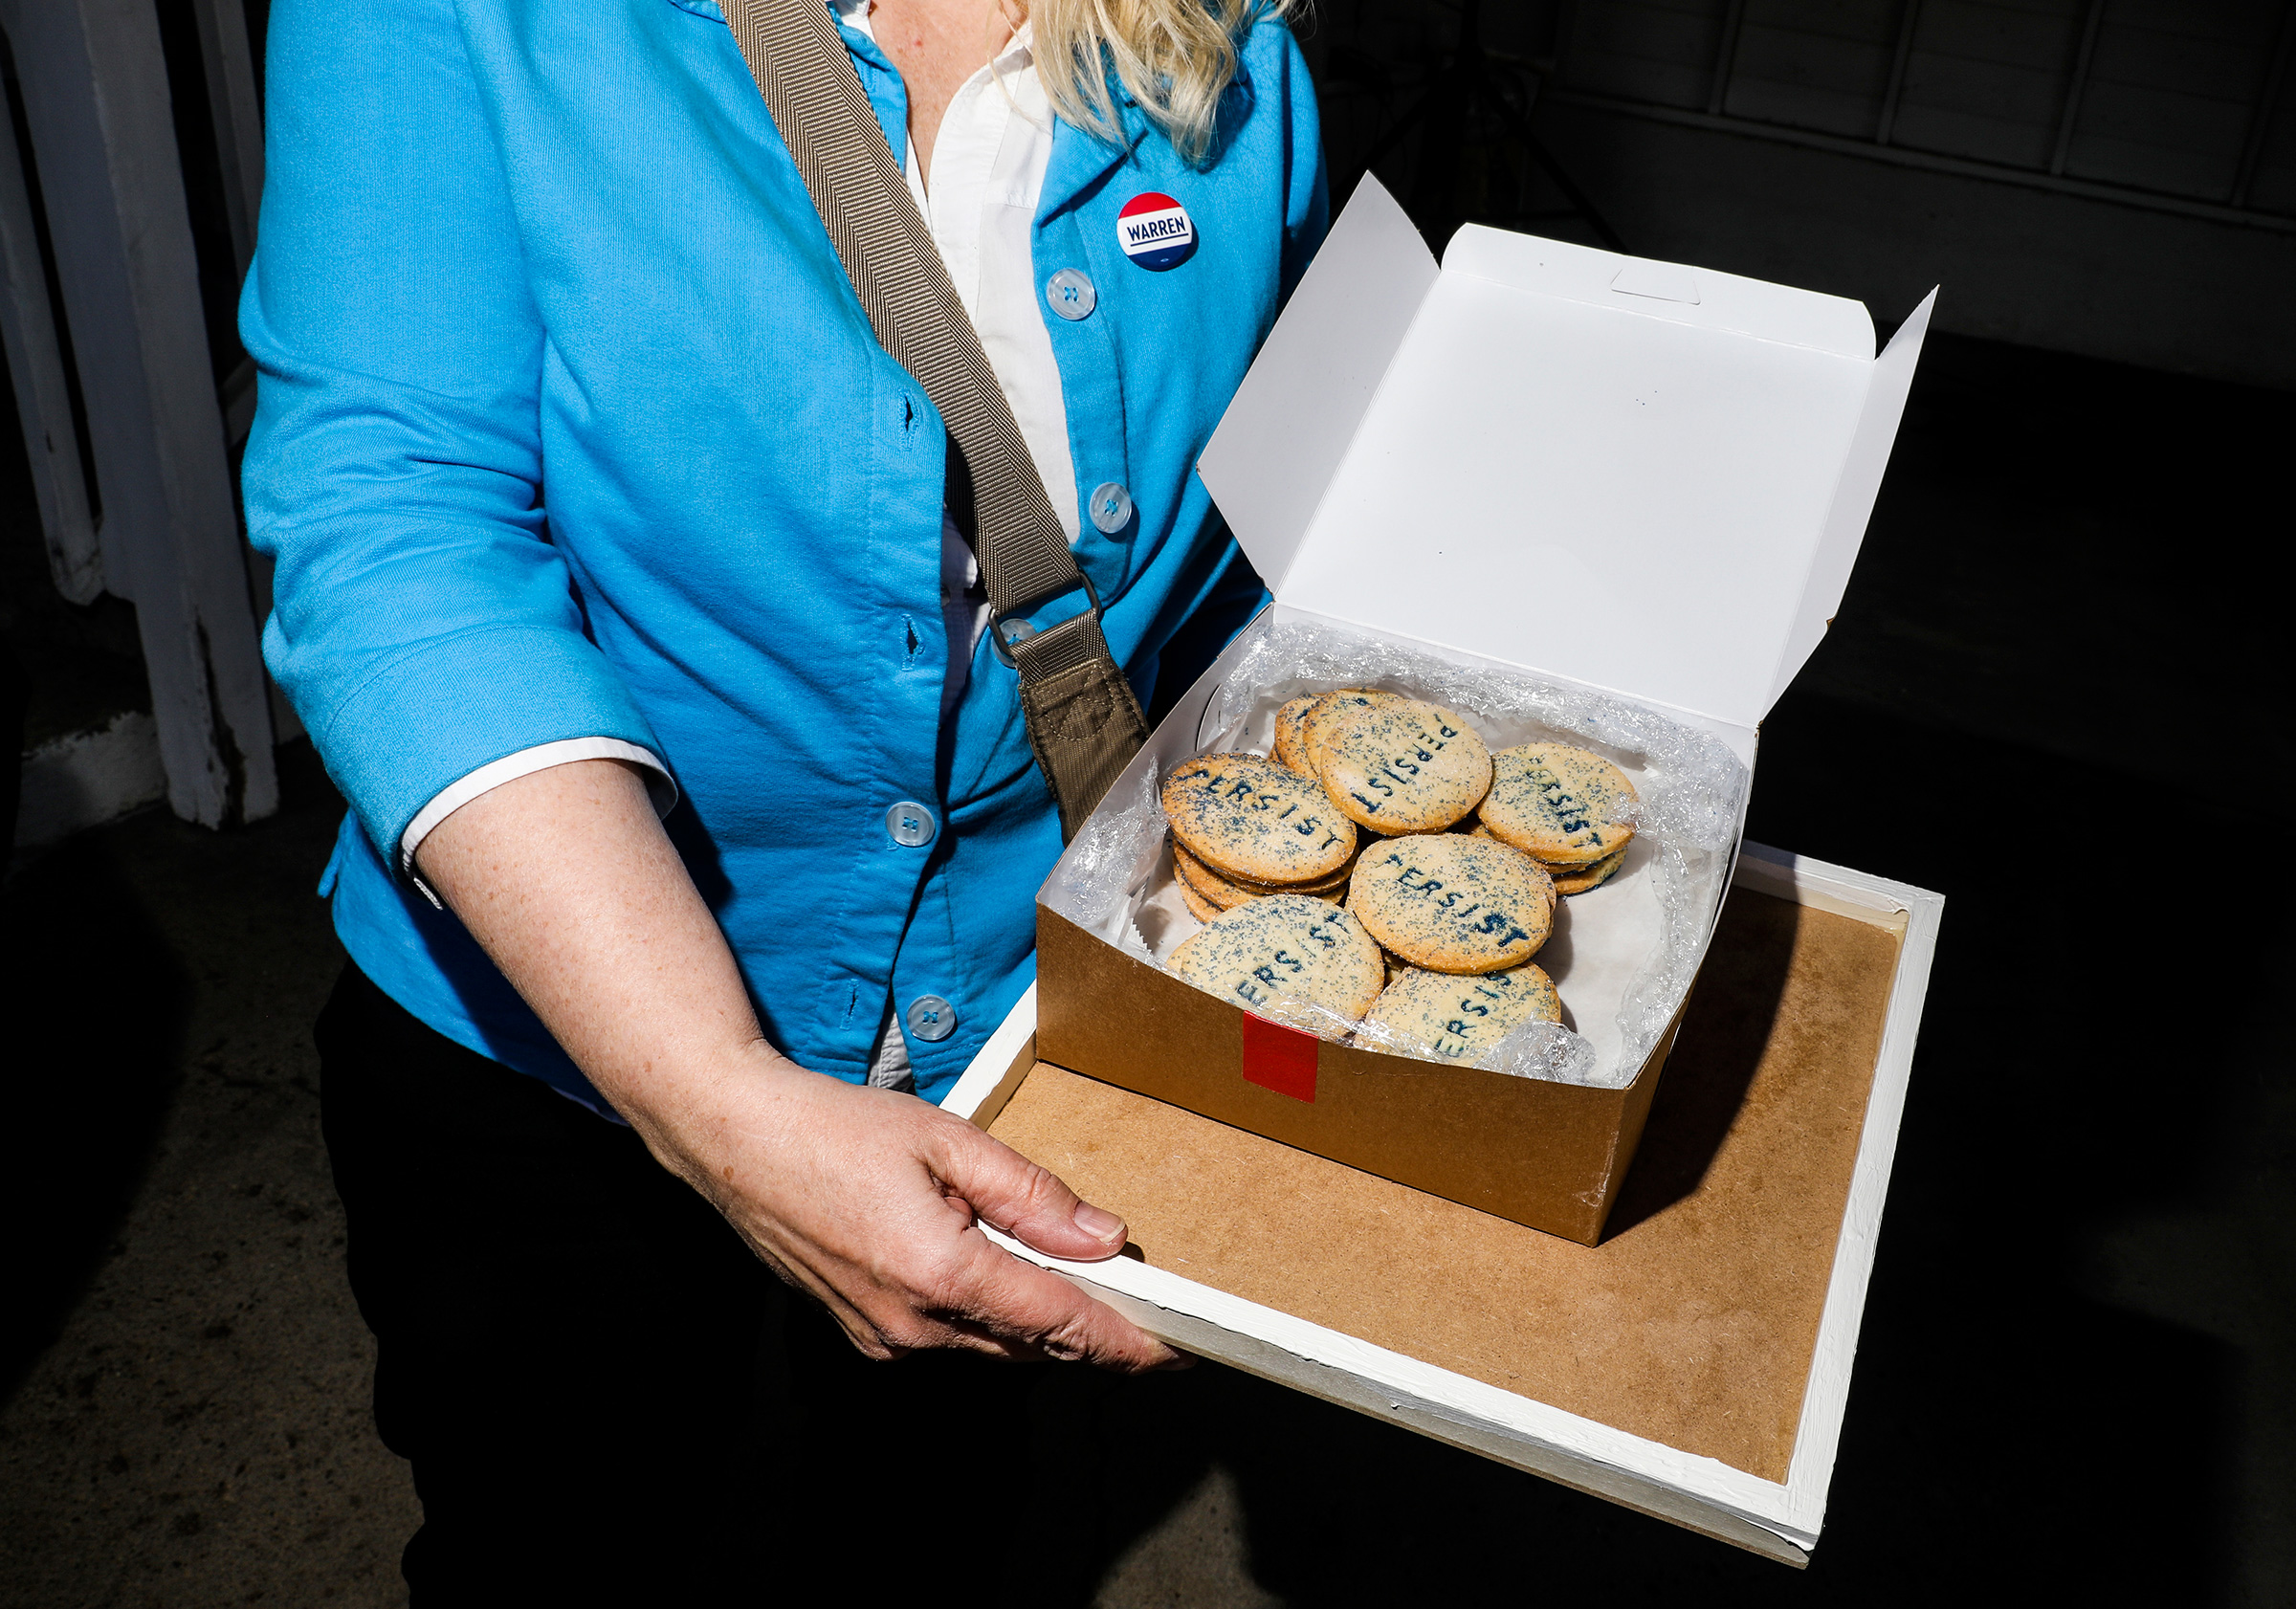 Warren supporter Barbara Weniger came all the way from Boston with cookies for the Iowa Falls House Party on May 3. (Krista Schlueter for TIME)